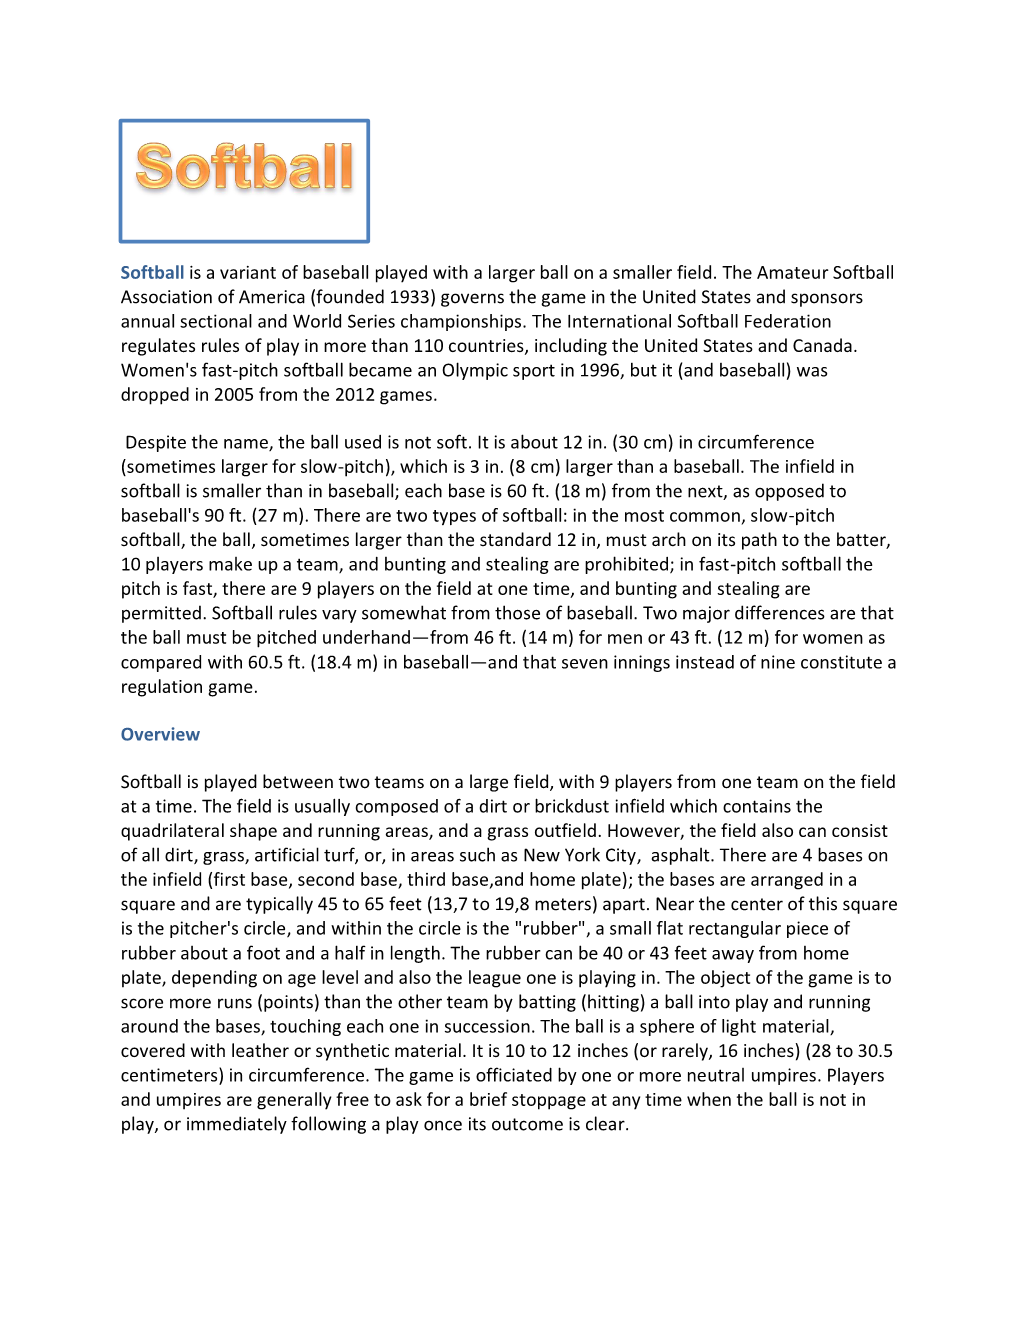 Is a Variant of Baseball Played with a Larger Ball on a Smaller Field. The